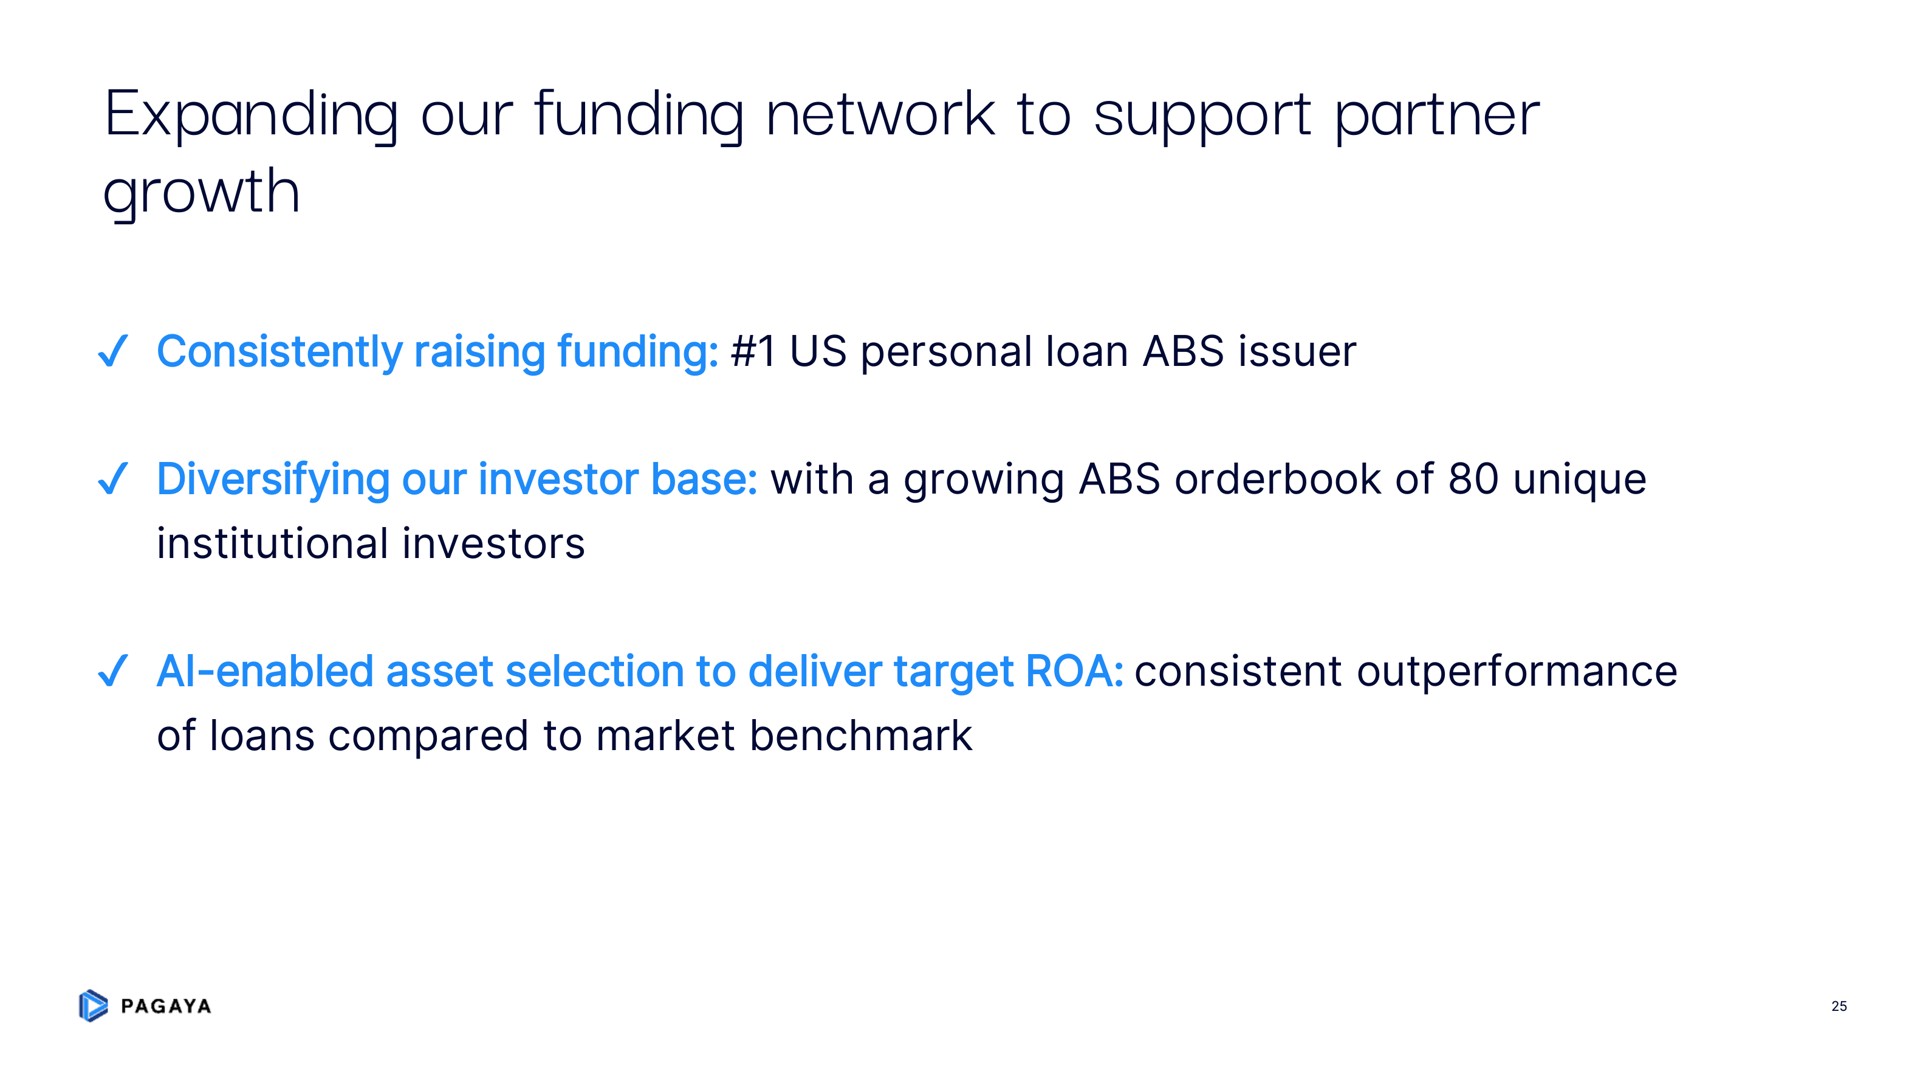 expanding our funding network to support partner growth | Pagaya